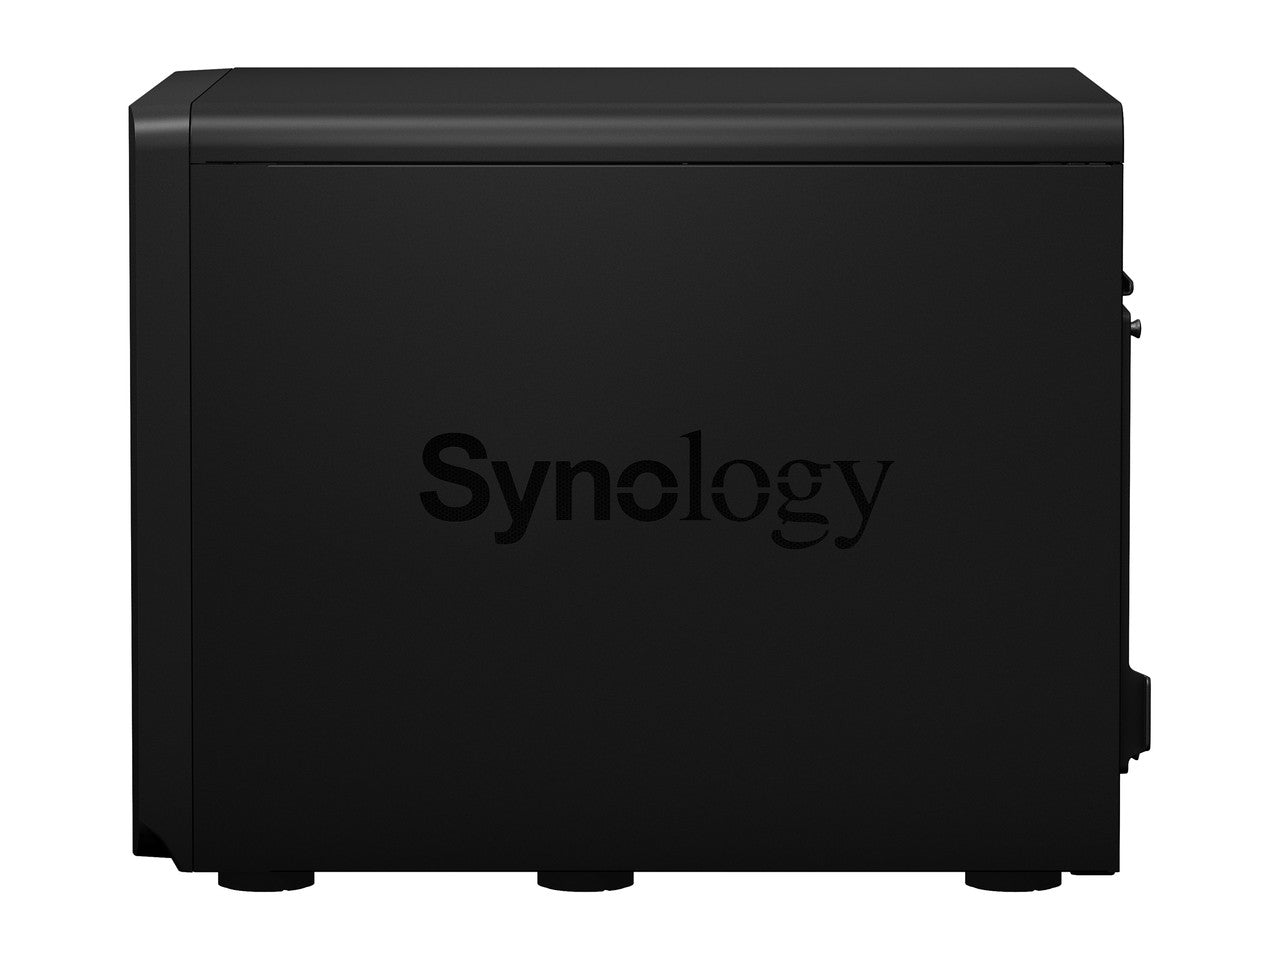 Synology DS2422+ Quad Core 2.2Ghz 12-Bay NAS with E10M20 10GbE Port and 1.6TB (2x800GB) CACHE, 4GB RAM and 192TB (12 x 16TB) of Synology Enterprise Drives